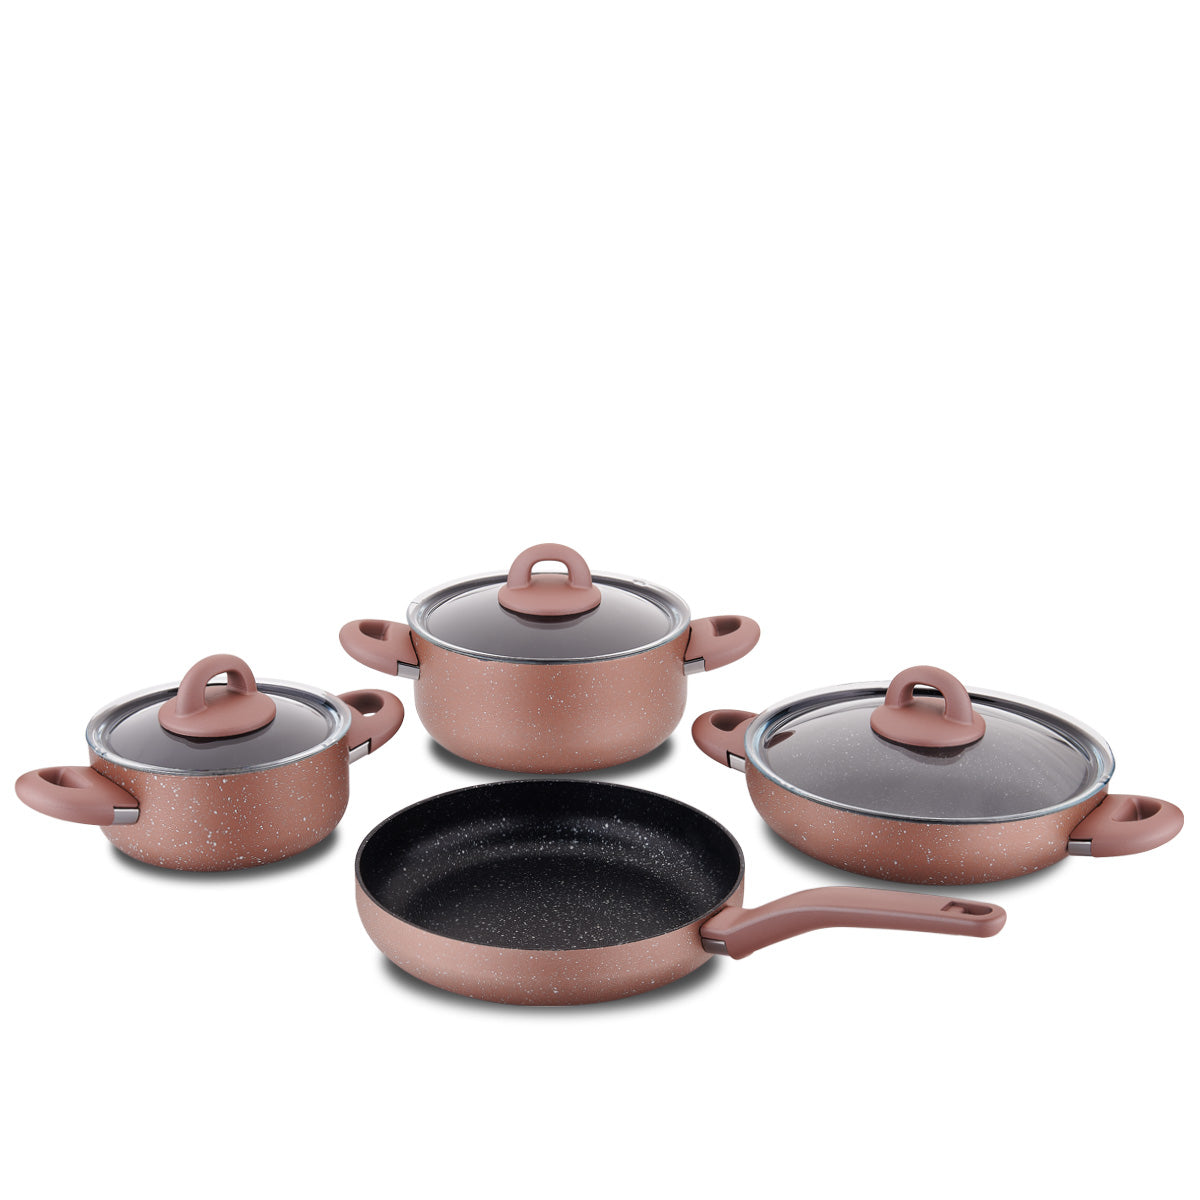 7 Piece Stainless Steel Pink Granite Cookware Set